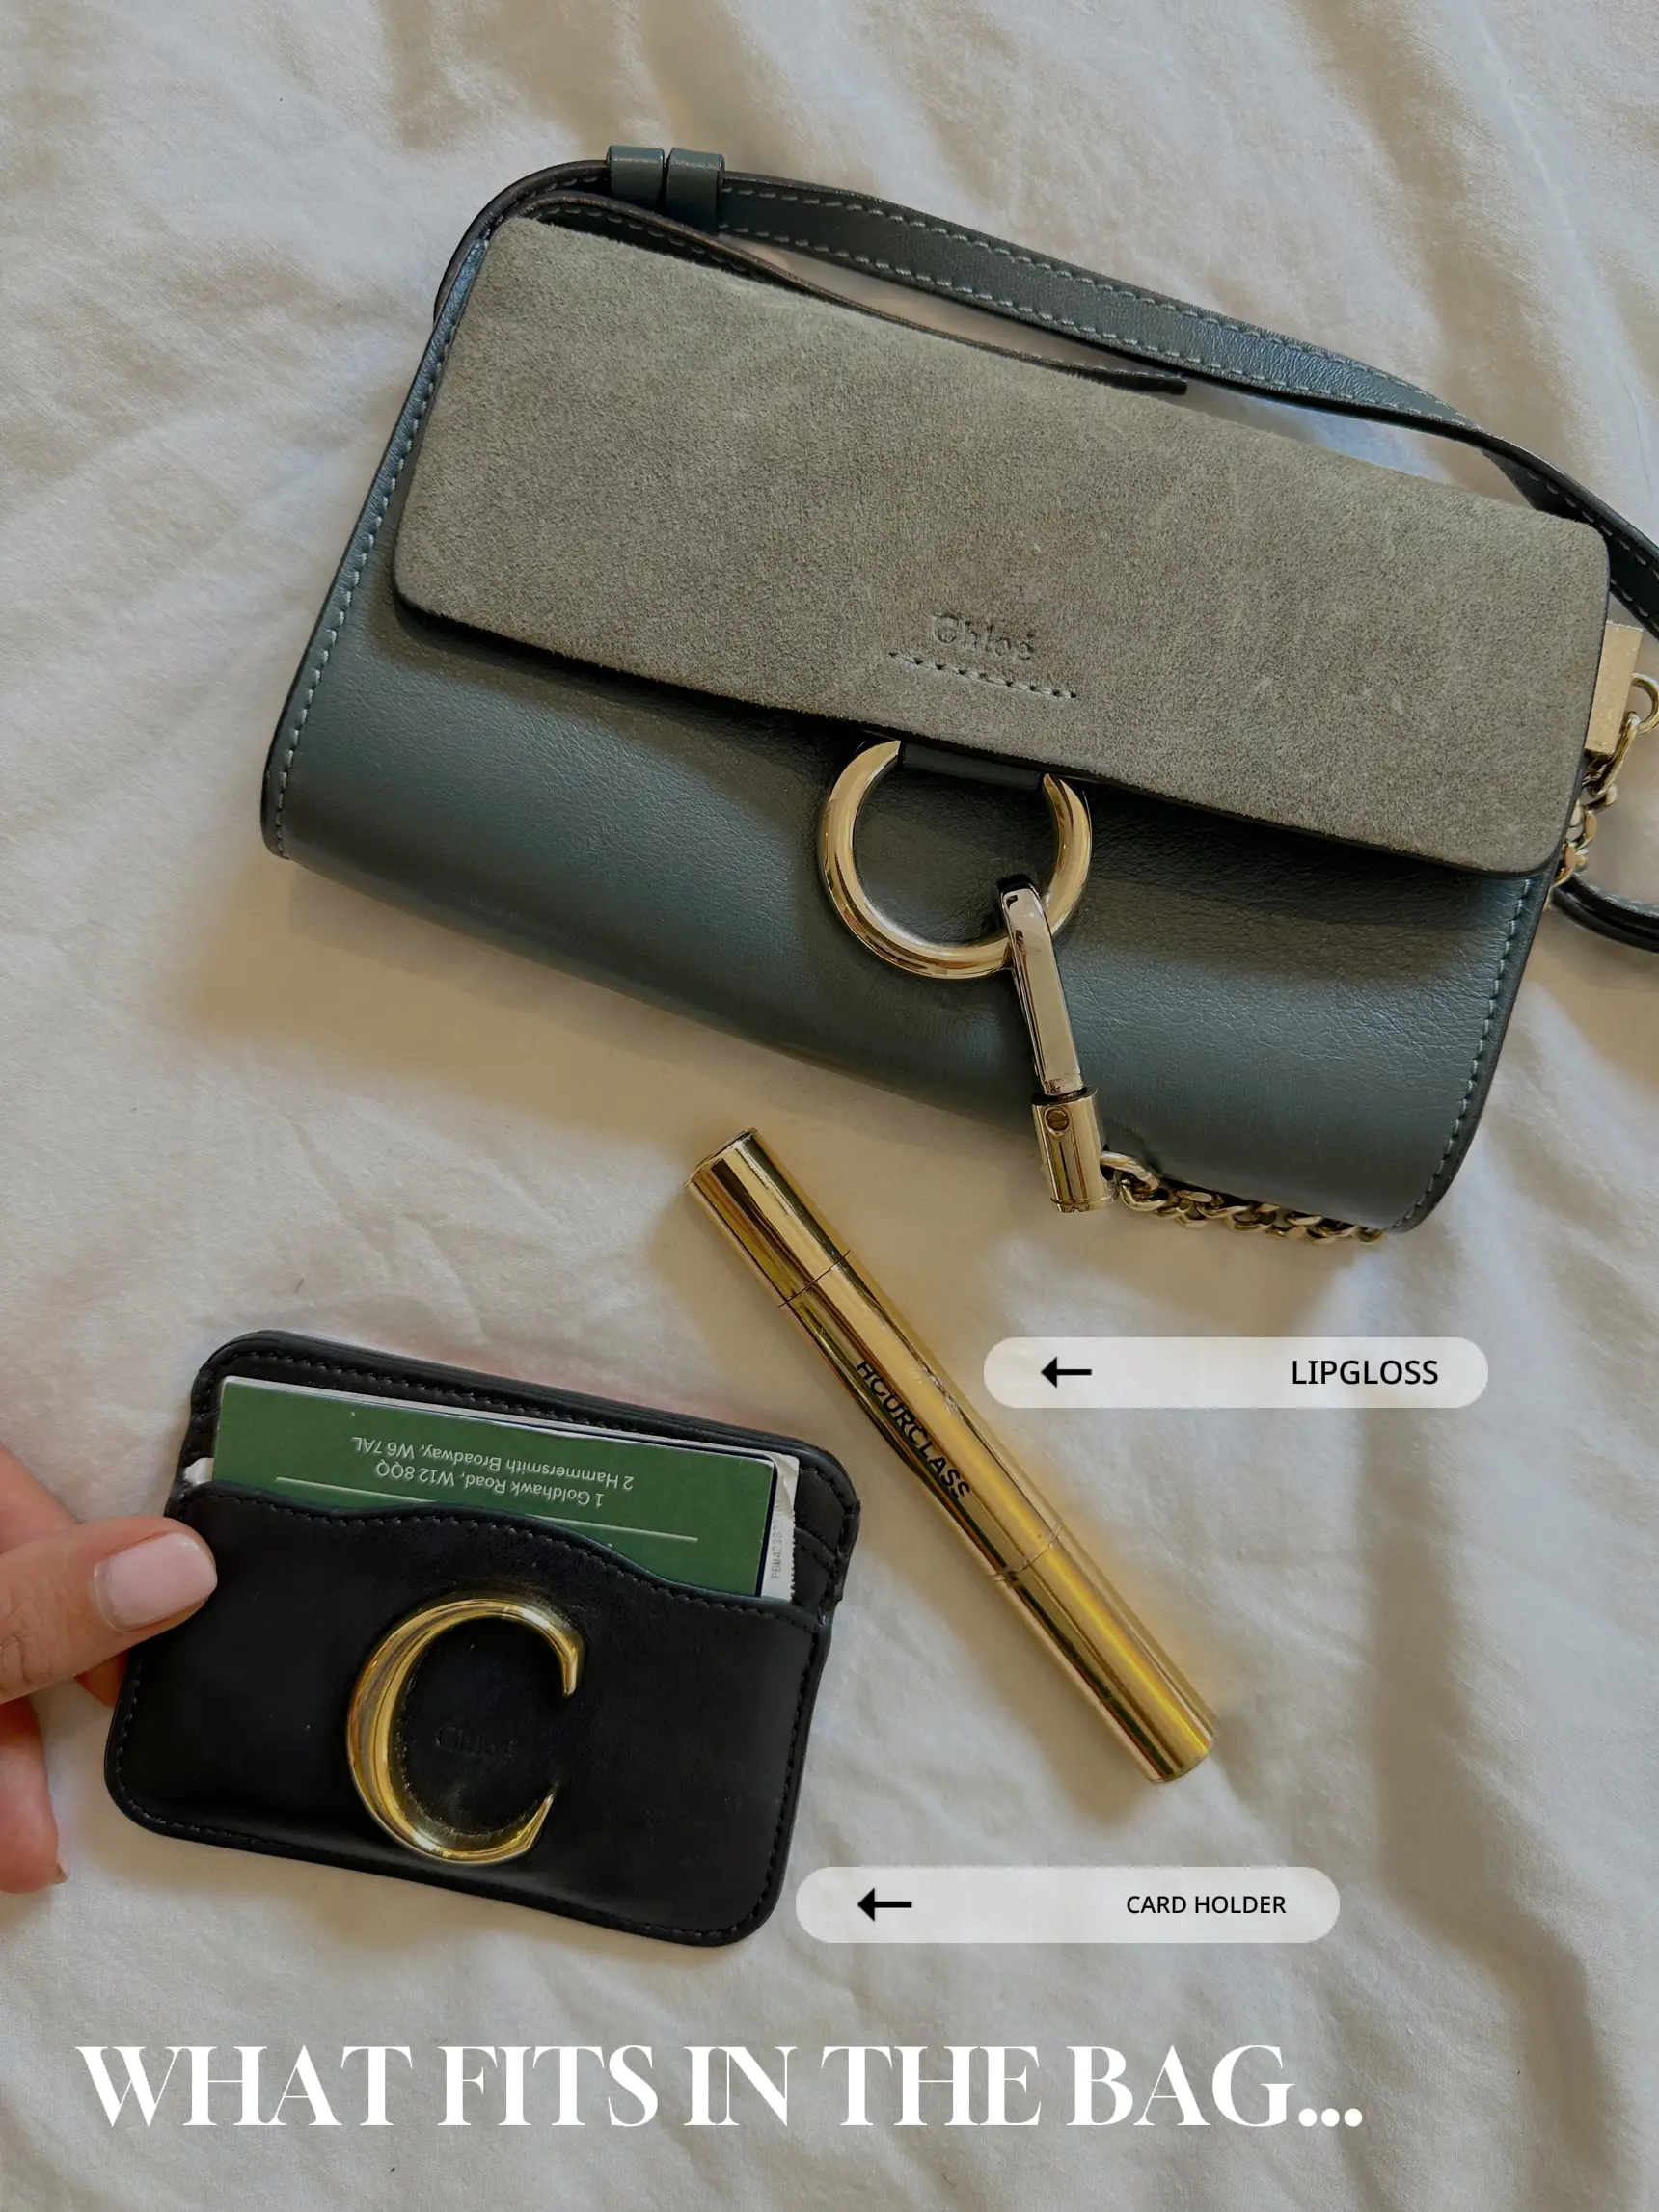 CHLOE FAYE MINI BAG REVIEW, Gallery posted by Lifewithdelphi